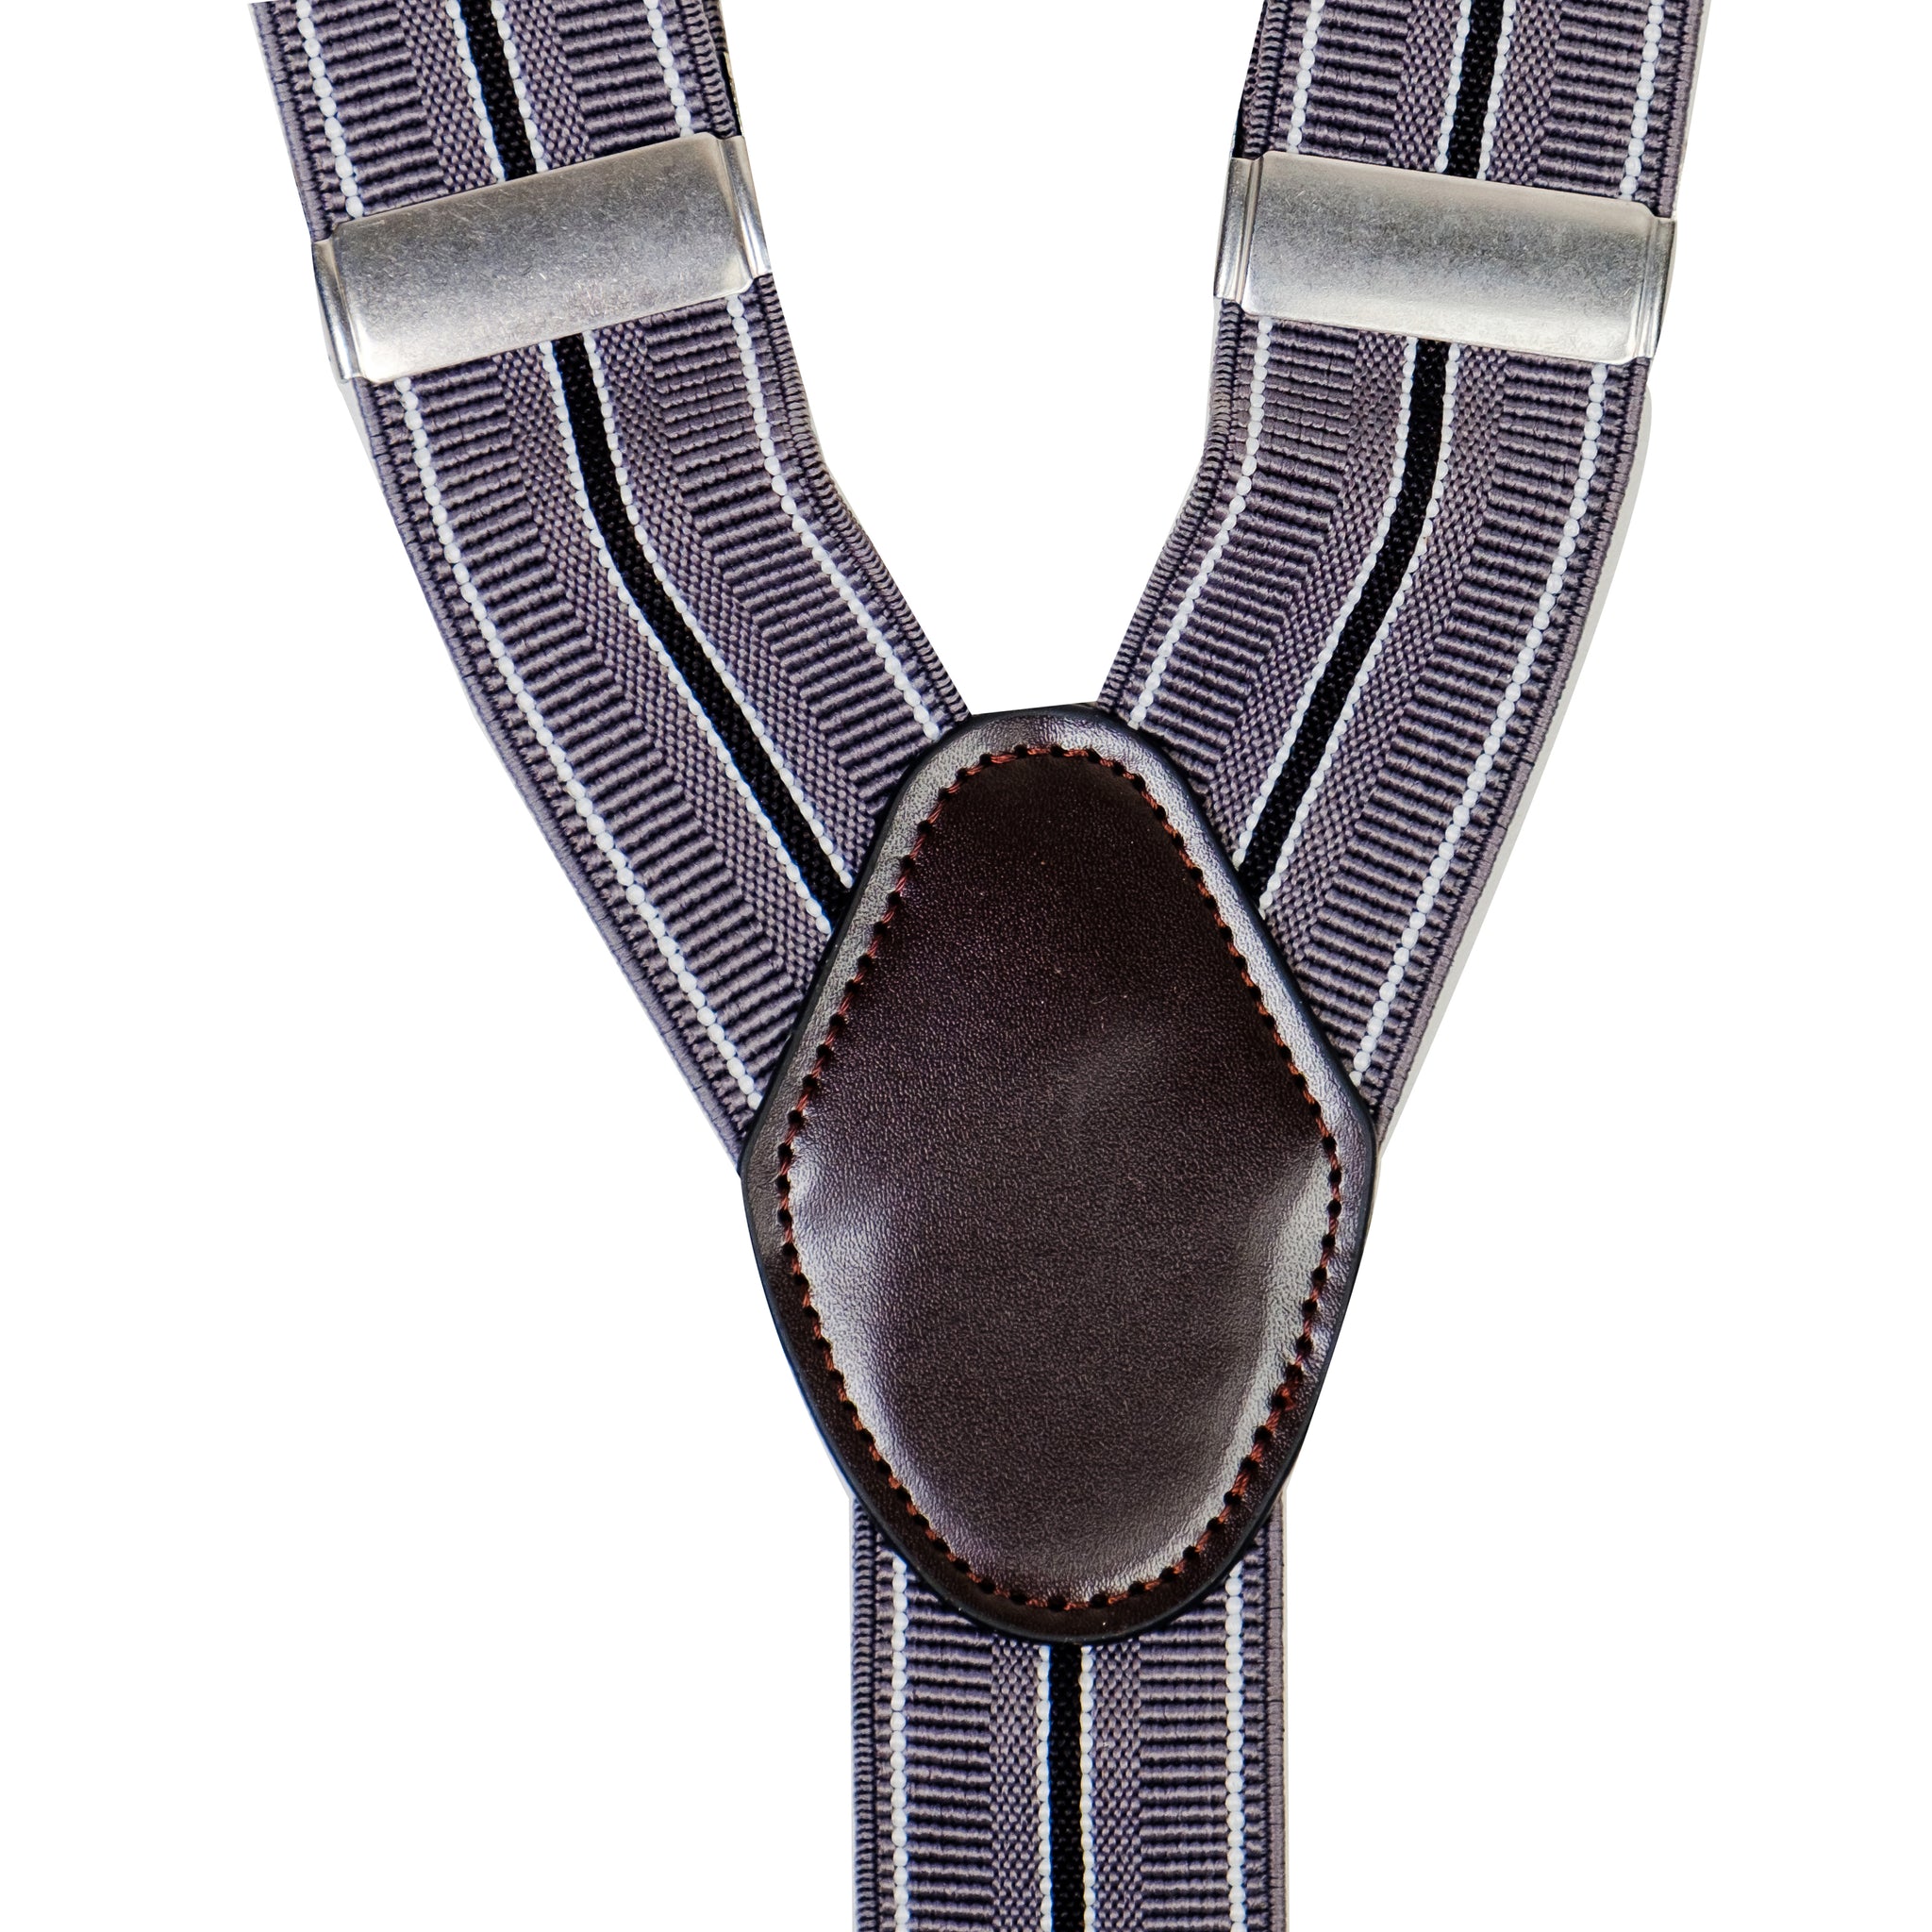 Chokore Stretchy Y-shaped Suspenders with 6-clips (Gray & Black)